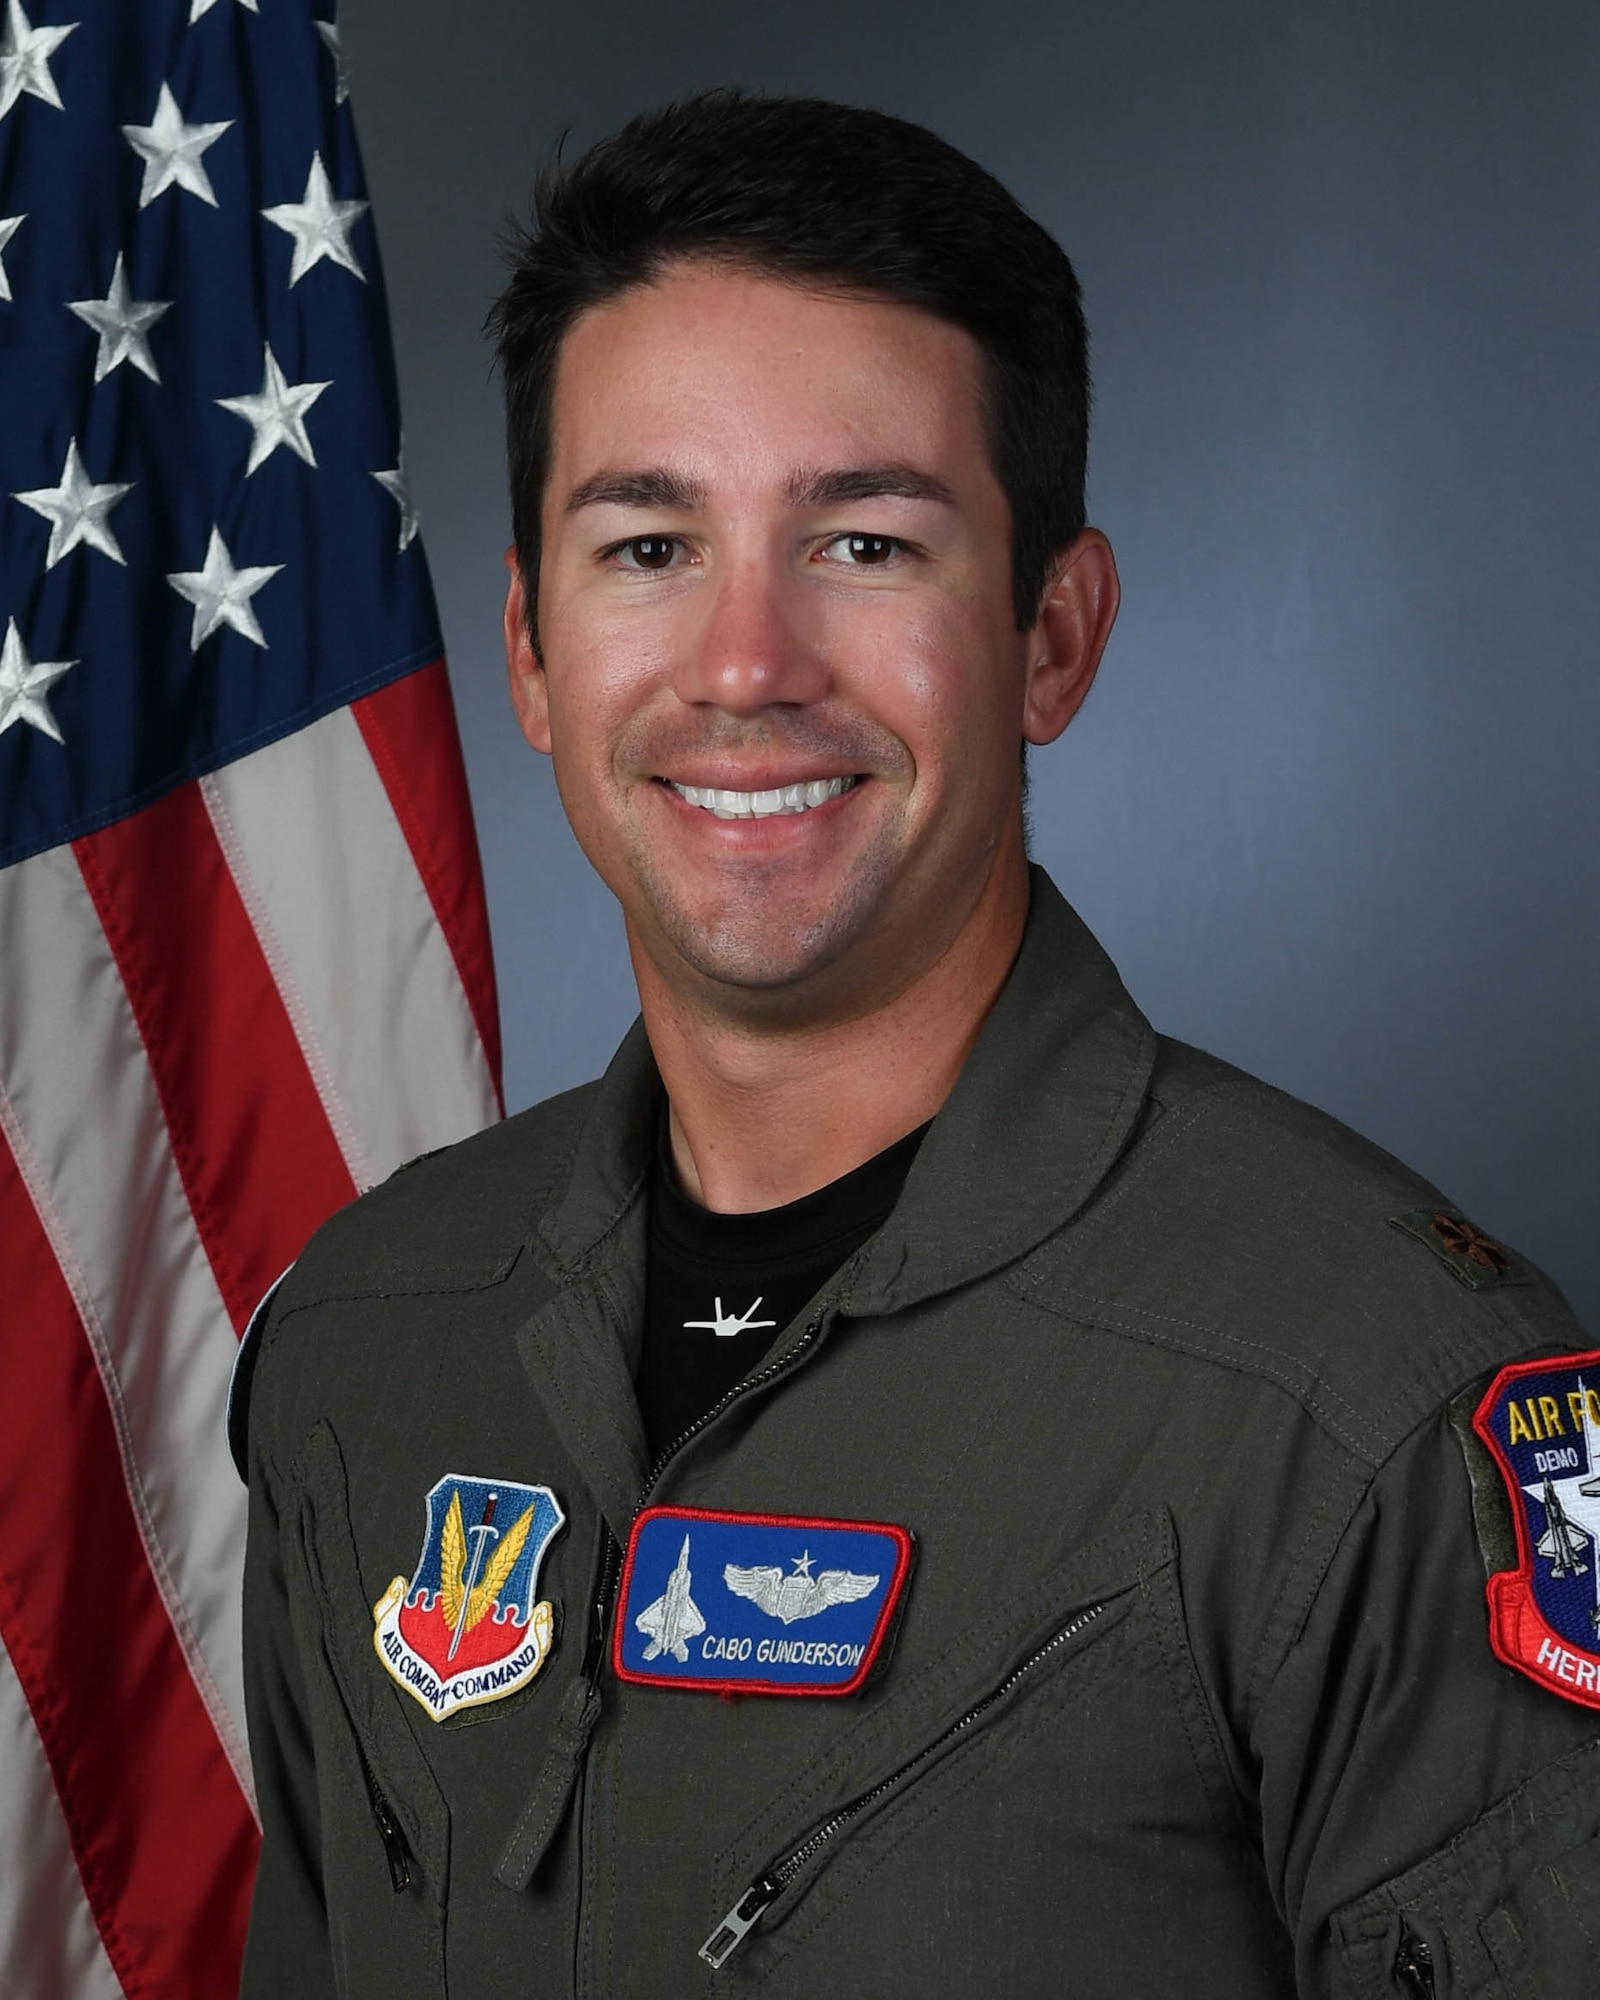 U.S. Air Force Maj. Josh Gunderson takes over as the new F-22 Demonstration Team pilot and commander, Jan. 21, 2020, Joint Base Langley-Eustis, Va. Gunderson, who goes by the callsign “Cabo,” will lead the 14-member demo team for both the 2020 and 2021 show seasons.